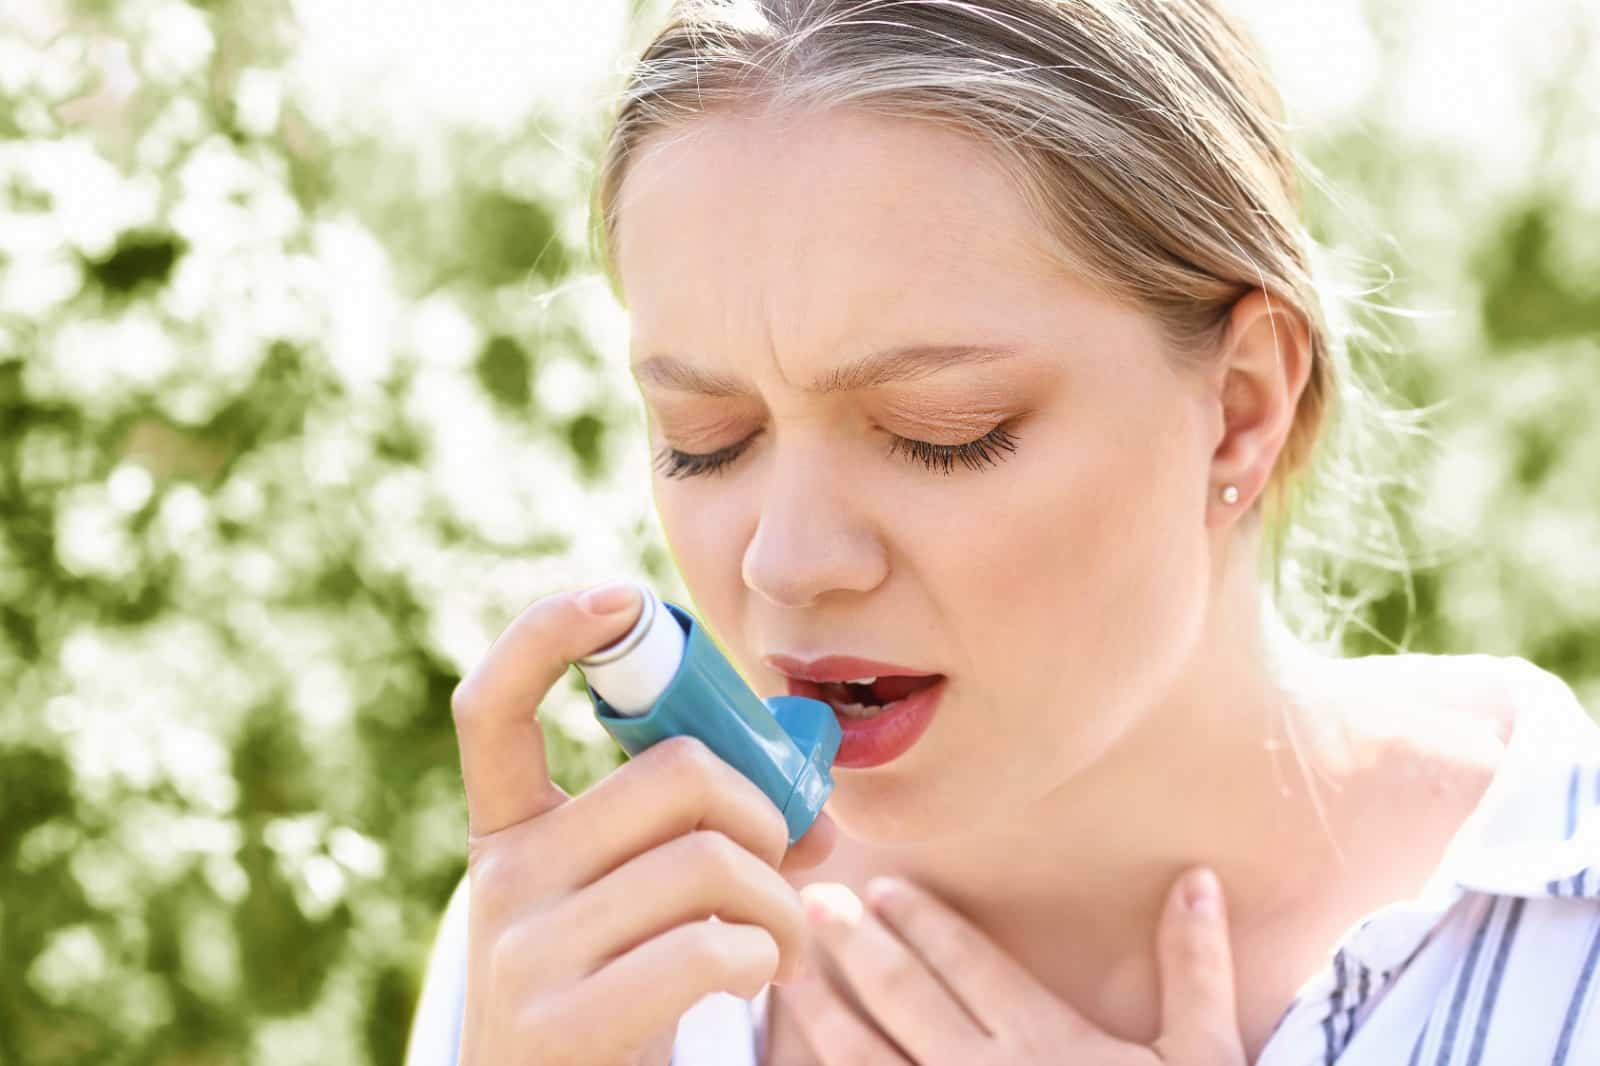 Strategies for coping with seasonal asthma flare-ups